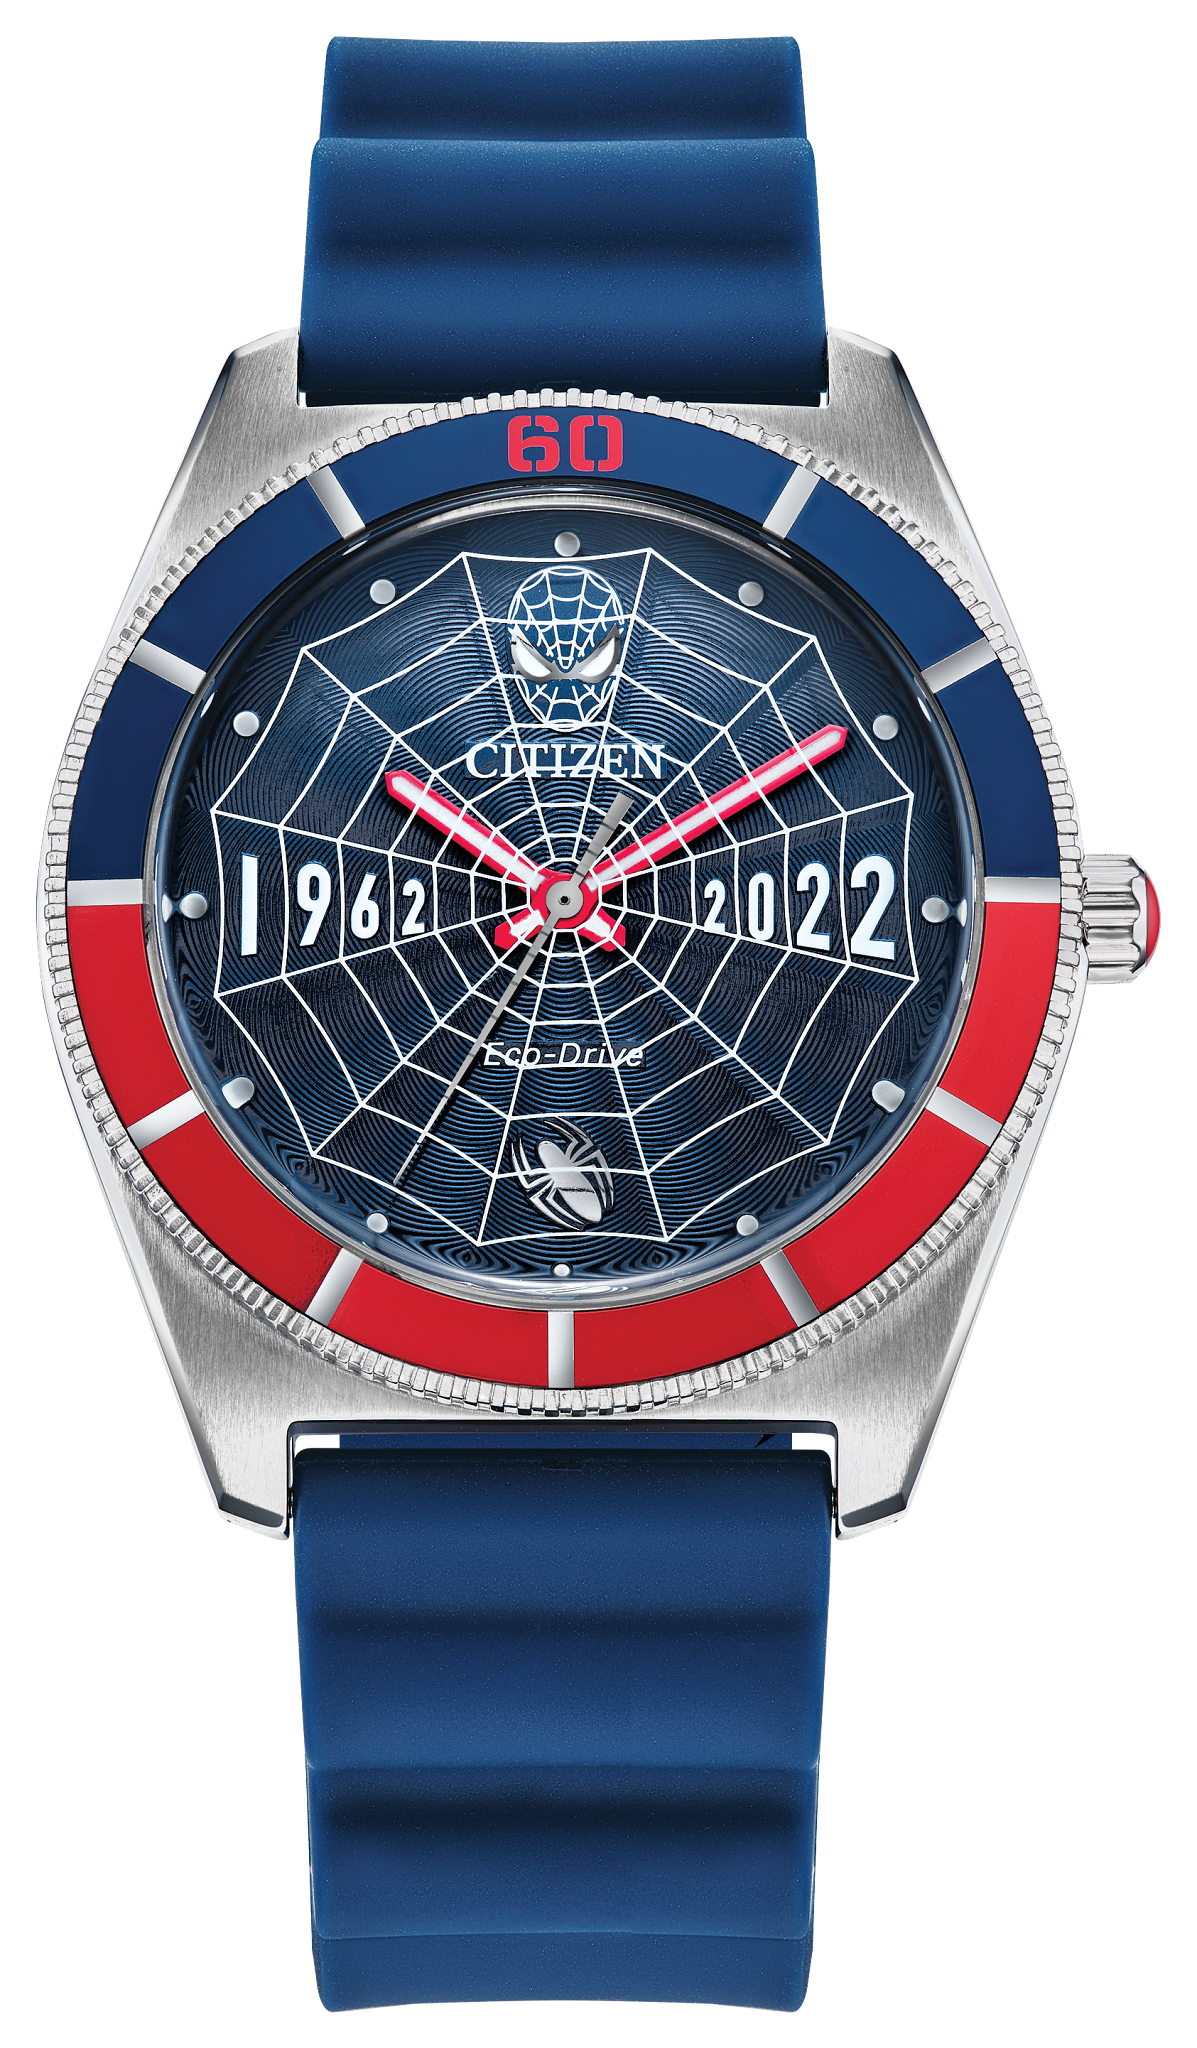 skyblue Digital 24 Images Spiderman Projector Watch for Kids, Diwali Gift,  Birthday Return Gift (Color May Vary) (Spider-Man and Ban Ten) : Amazon.in:  Watches